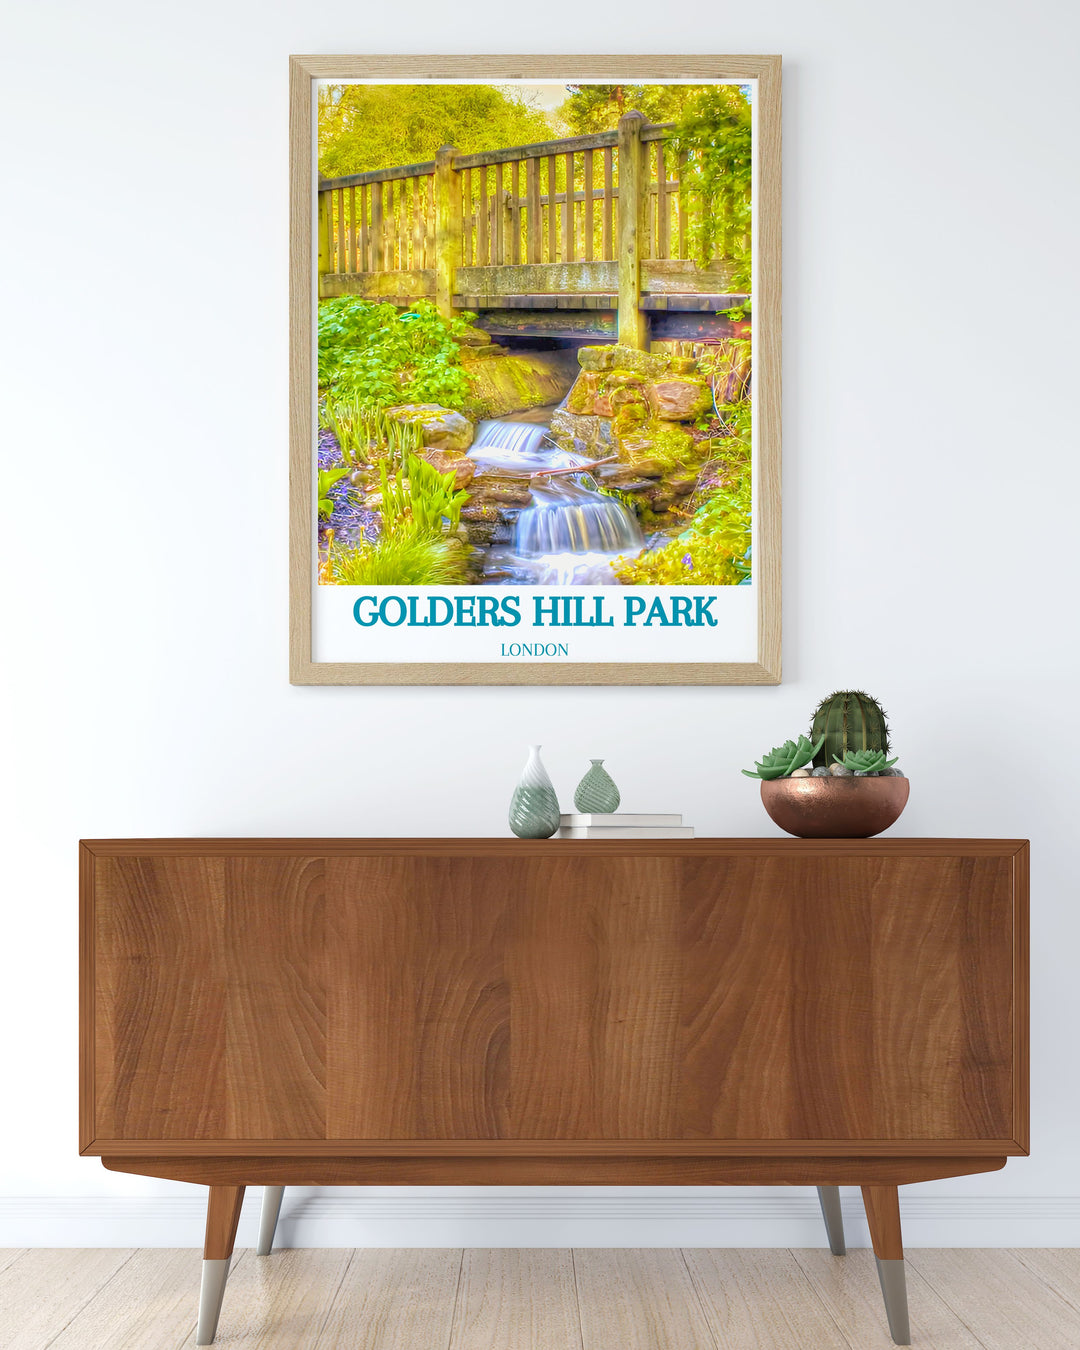 Custom print of the Water Gardens at Golders Hill Park, offering a unique perspective of this peaceful attraction, perfect for adding character to any room.